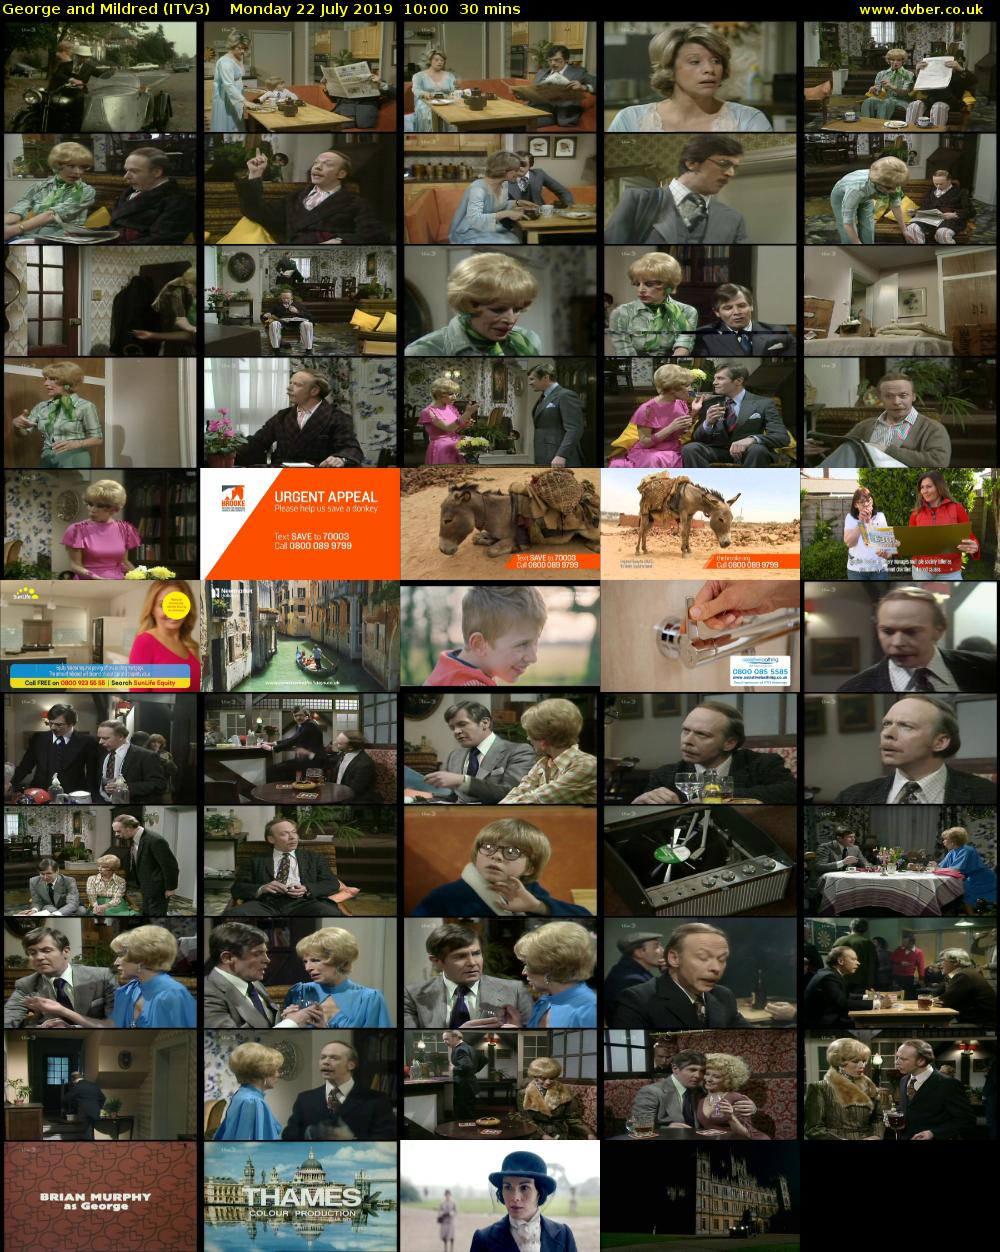 George and Mildred (ITV3) Monday 22 July 2019 10:00 - 10:30